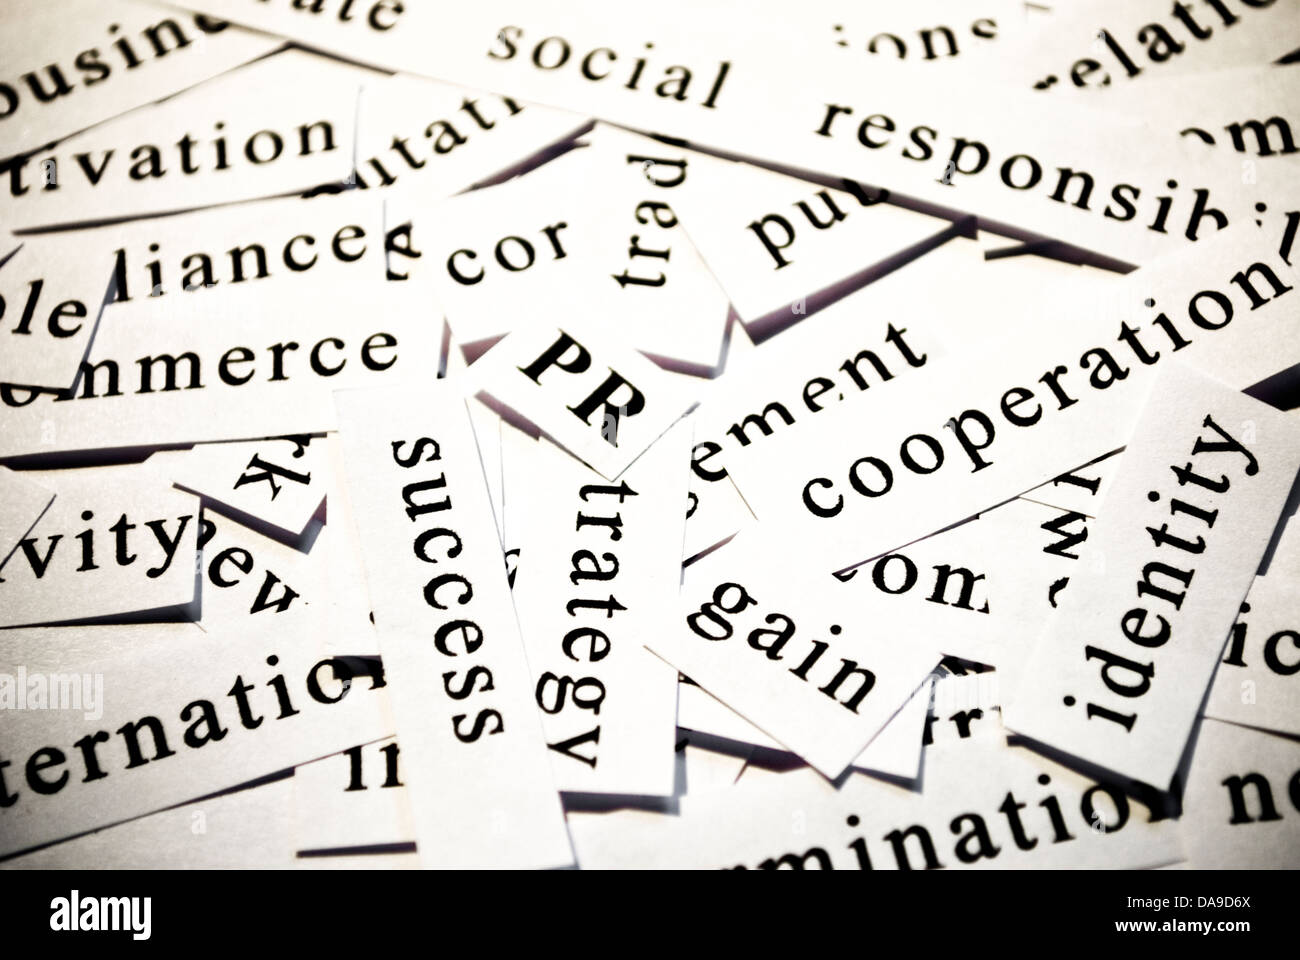 PR or public relations. Concept of cut-out words related with business activity. Stock Photo